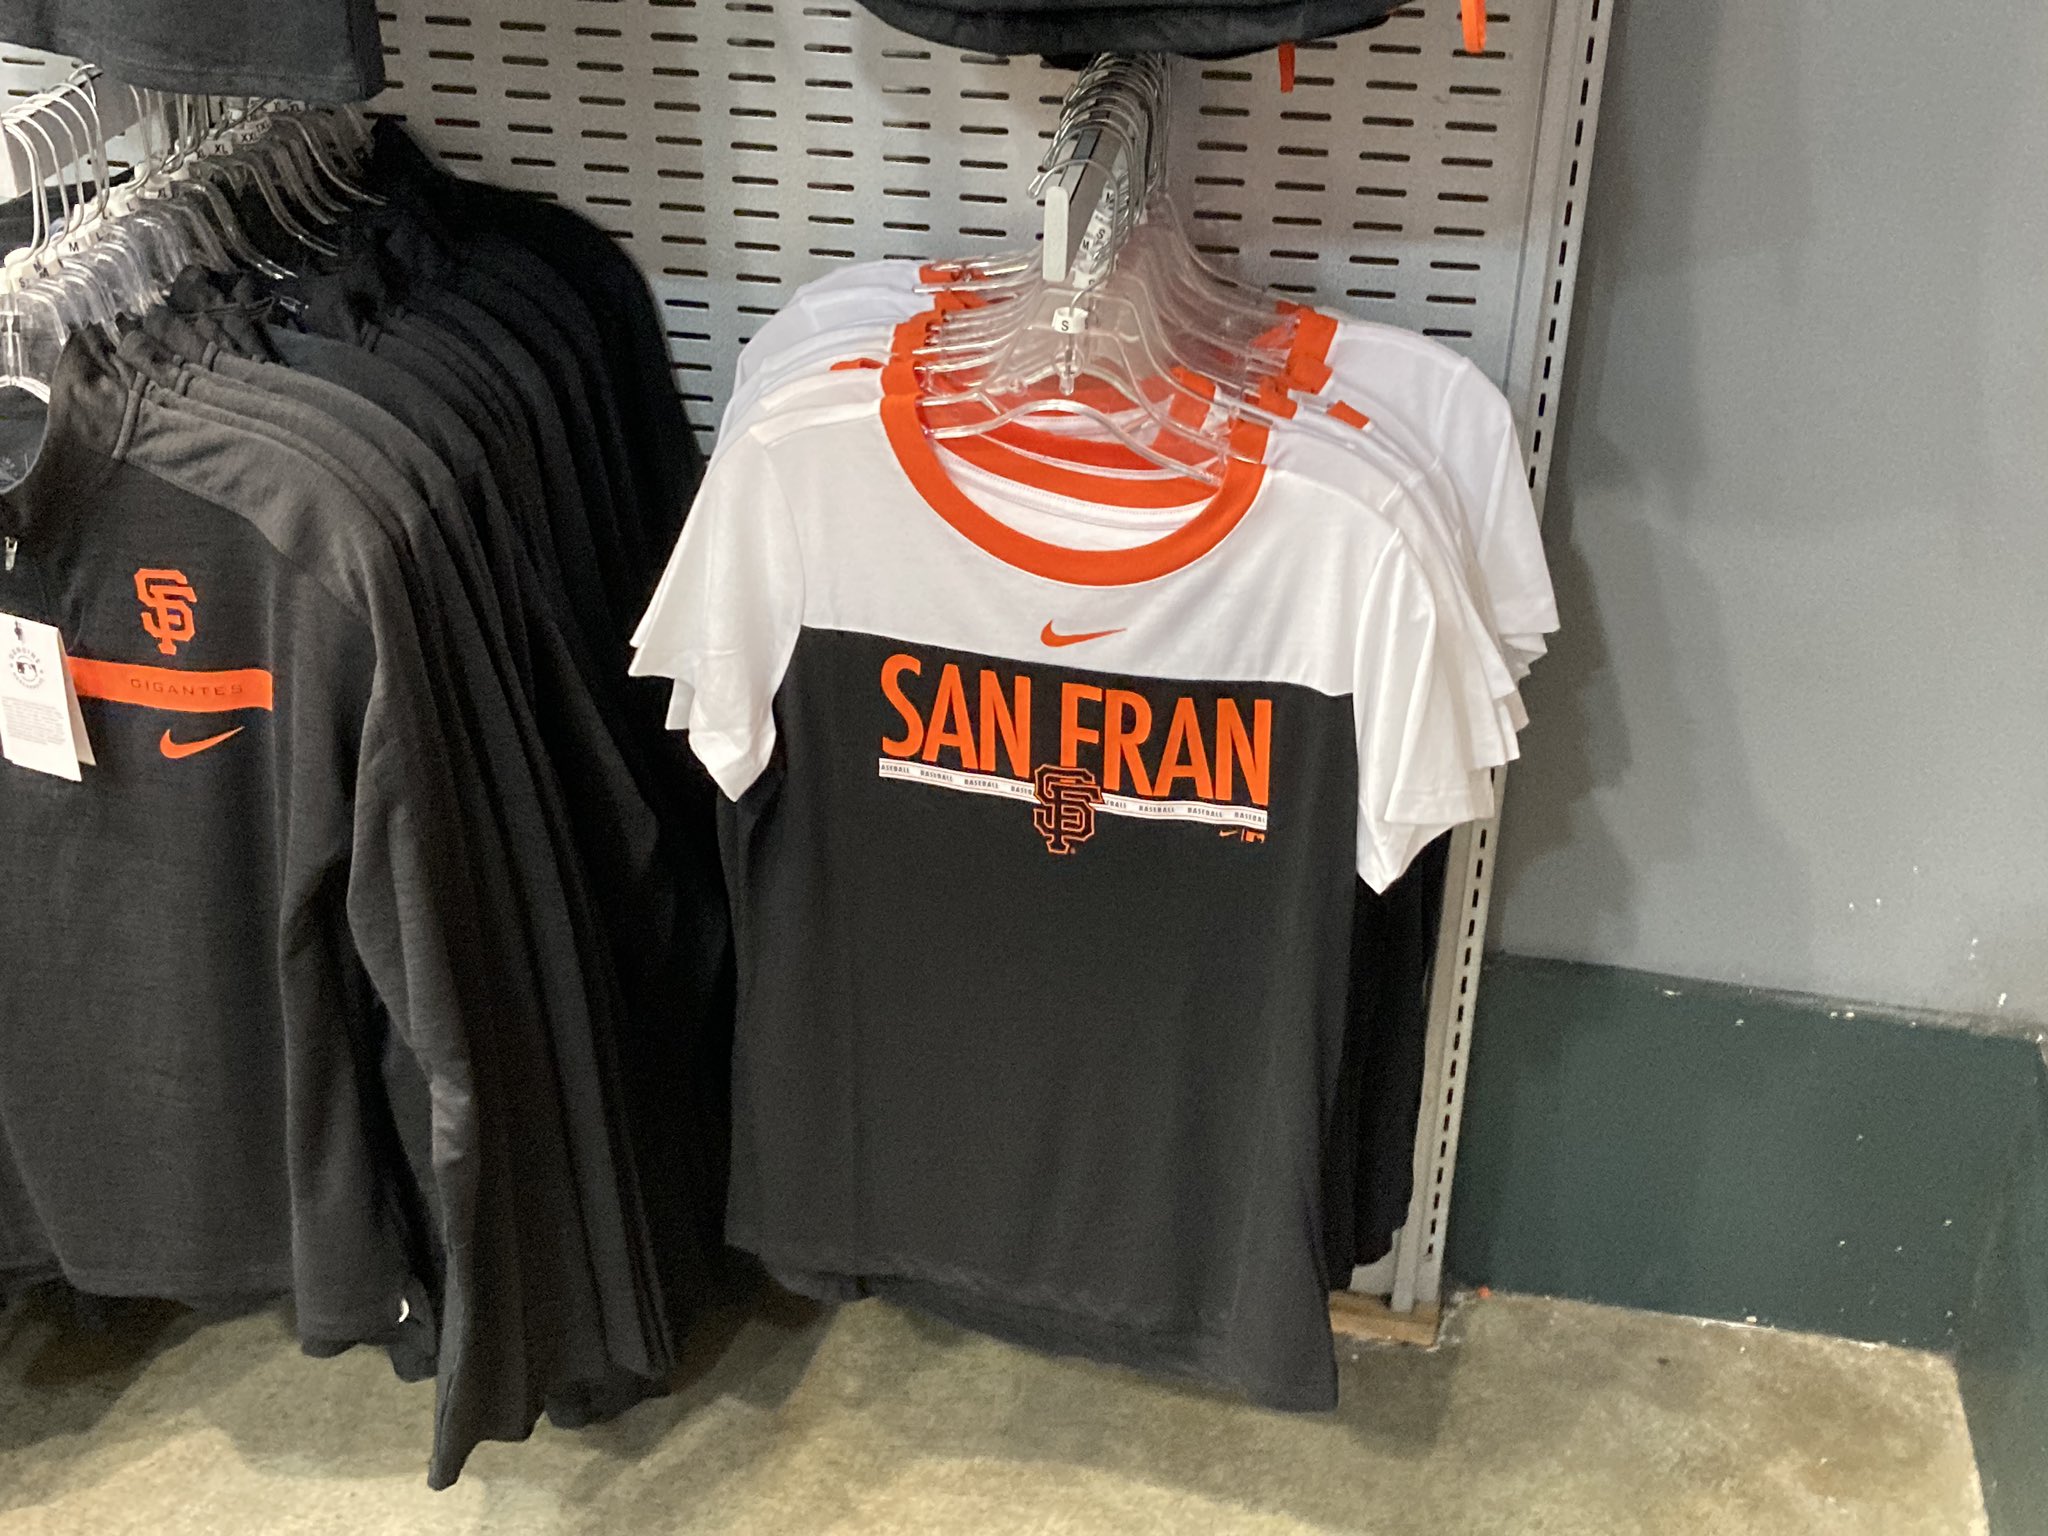 Peter Hartlaub on X: WTAF @SFGiants!! Who approved this?!? This should not  be in the Dugout Store. Would be like walking in the Hogwarts store from  “Harry Potter” and finding a T-shirt